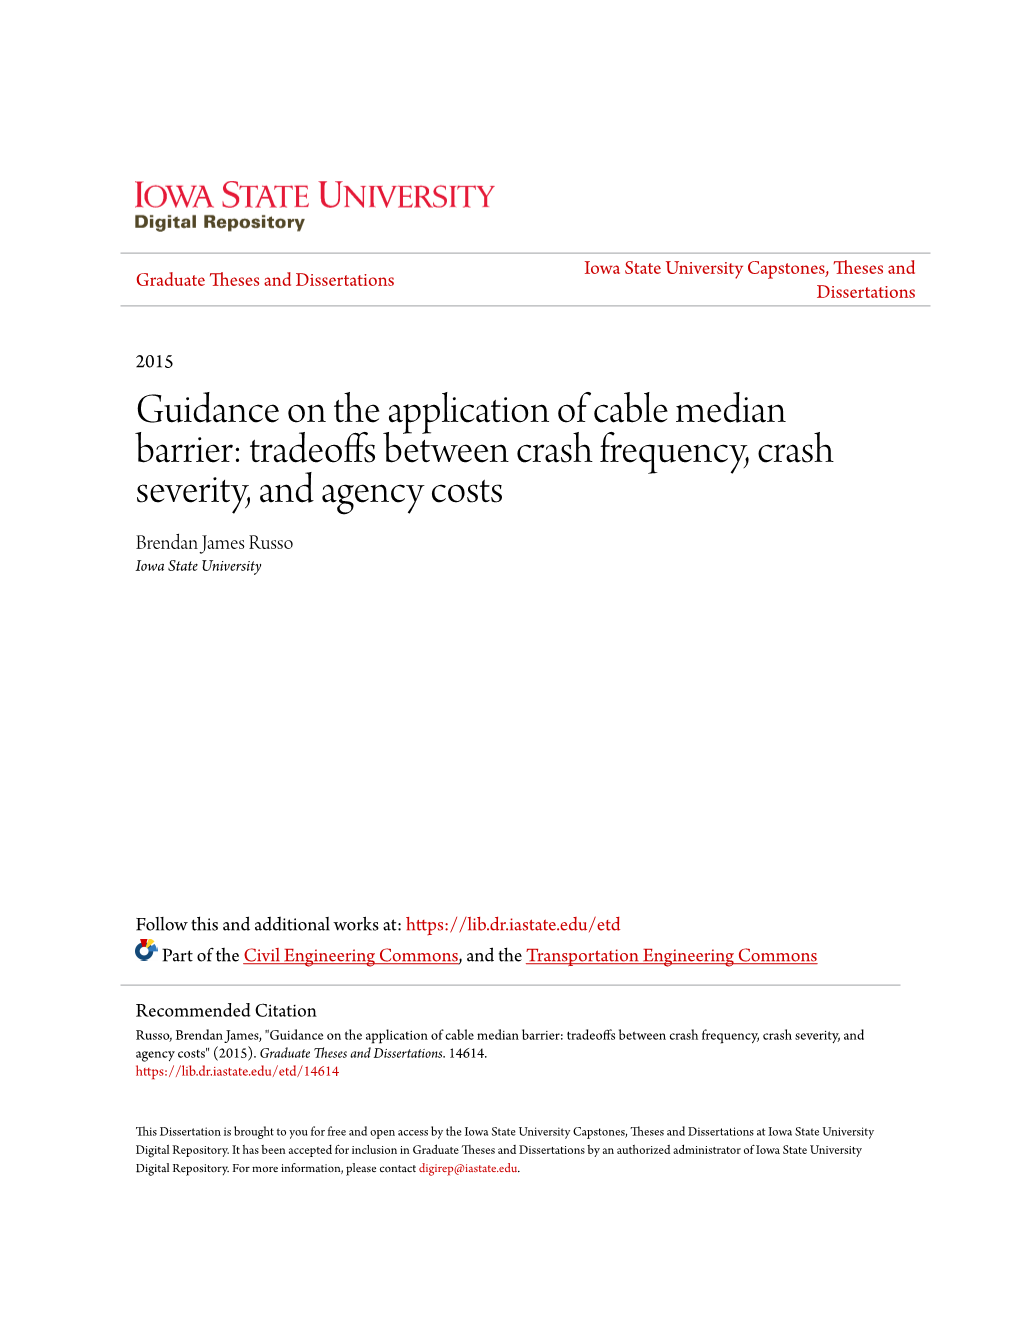 Guidance on the Application of Cable Median Barrier: Tradeoffs Between Crash Frequency, Crash Severity, and Agency Costs Brendan James Russo Iowa State University